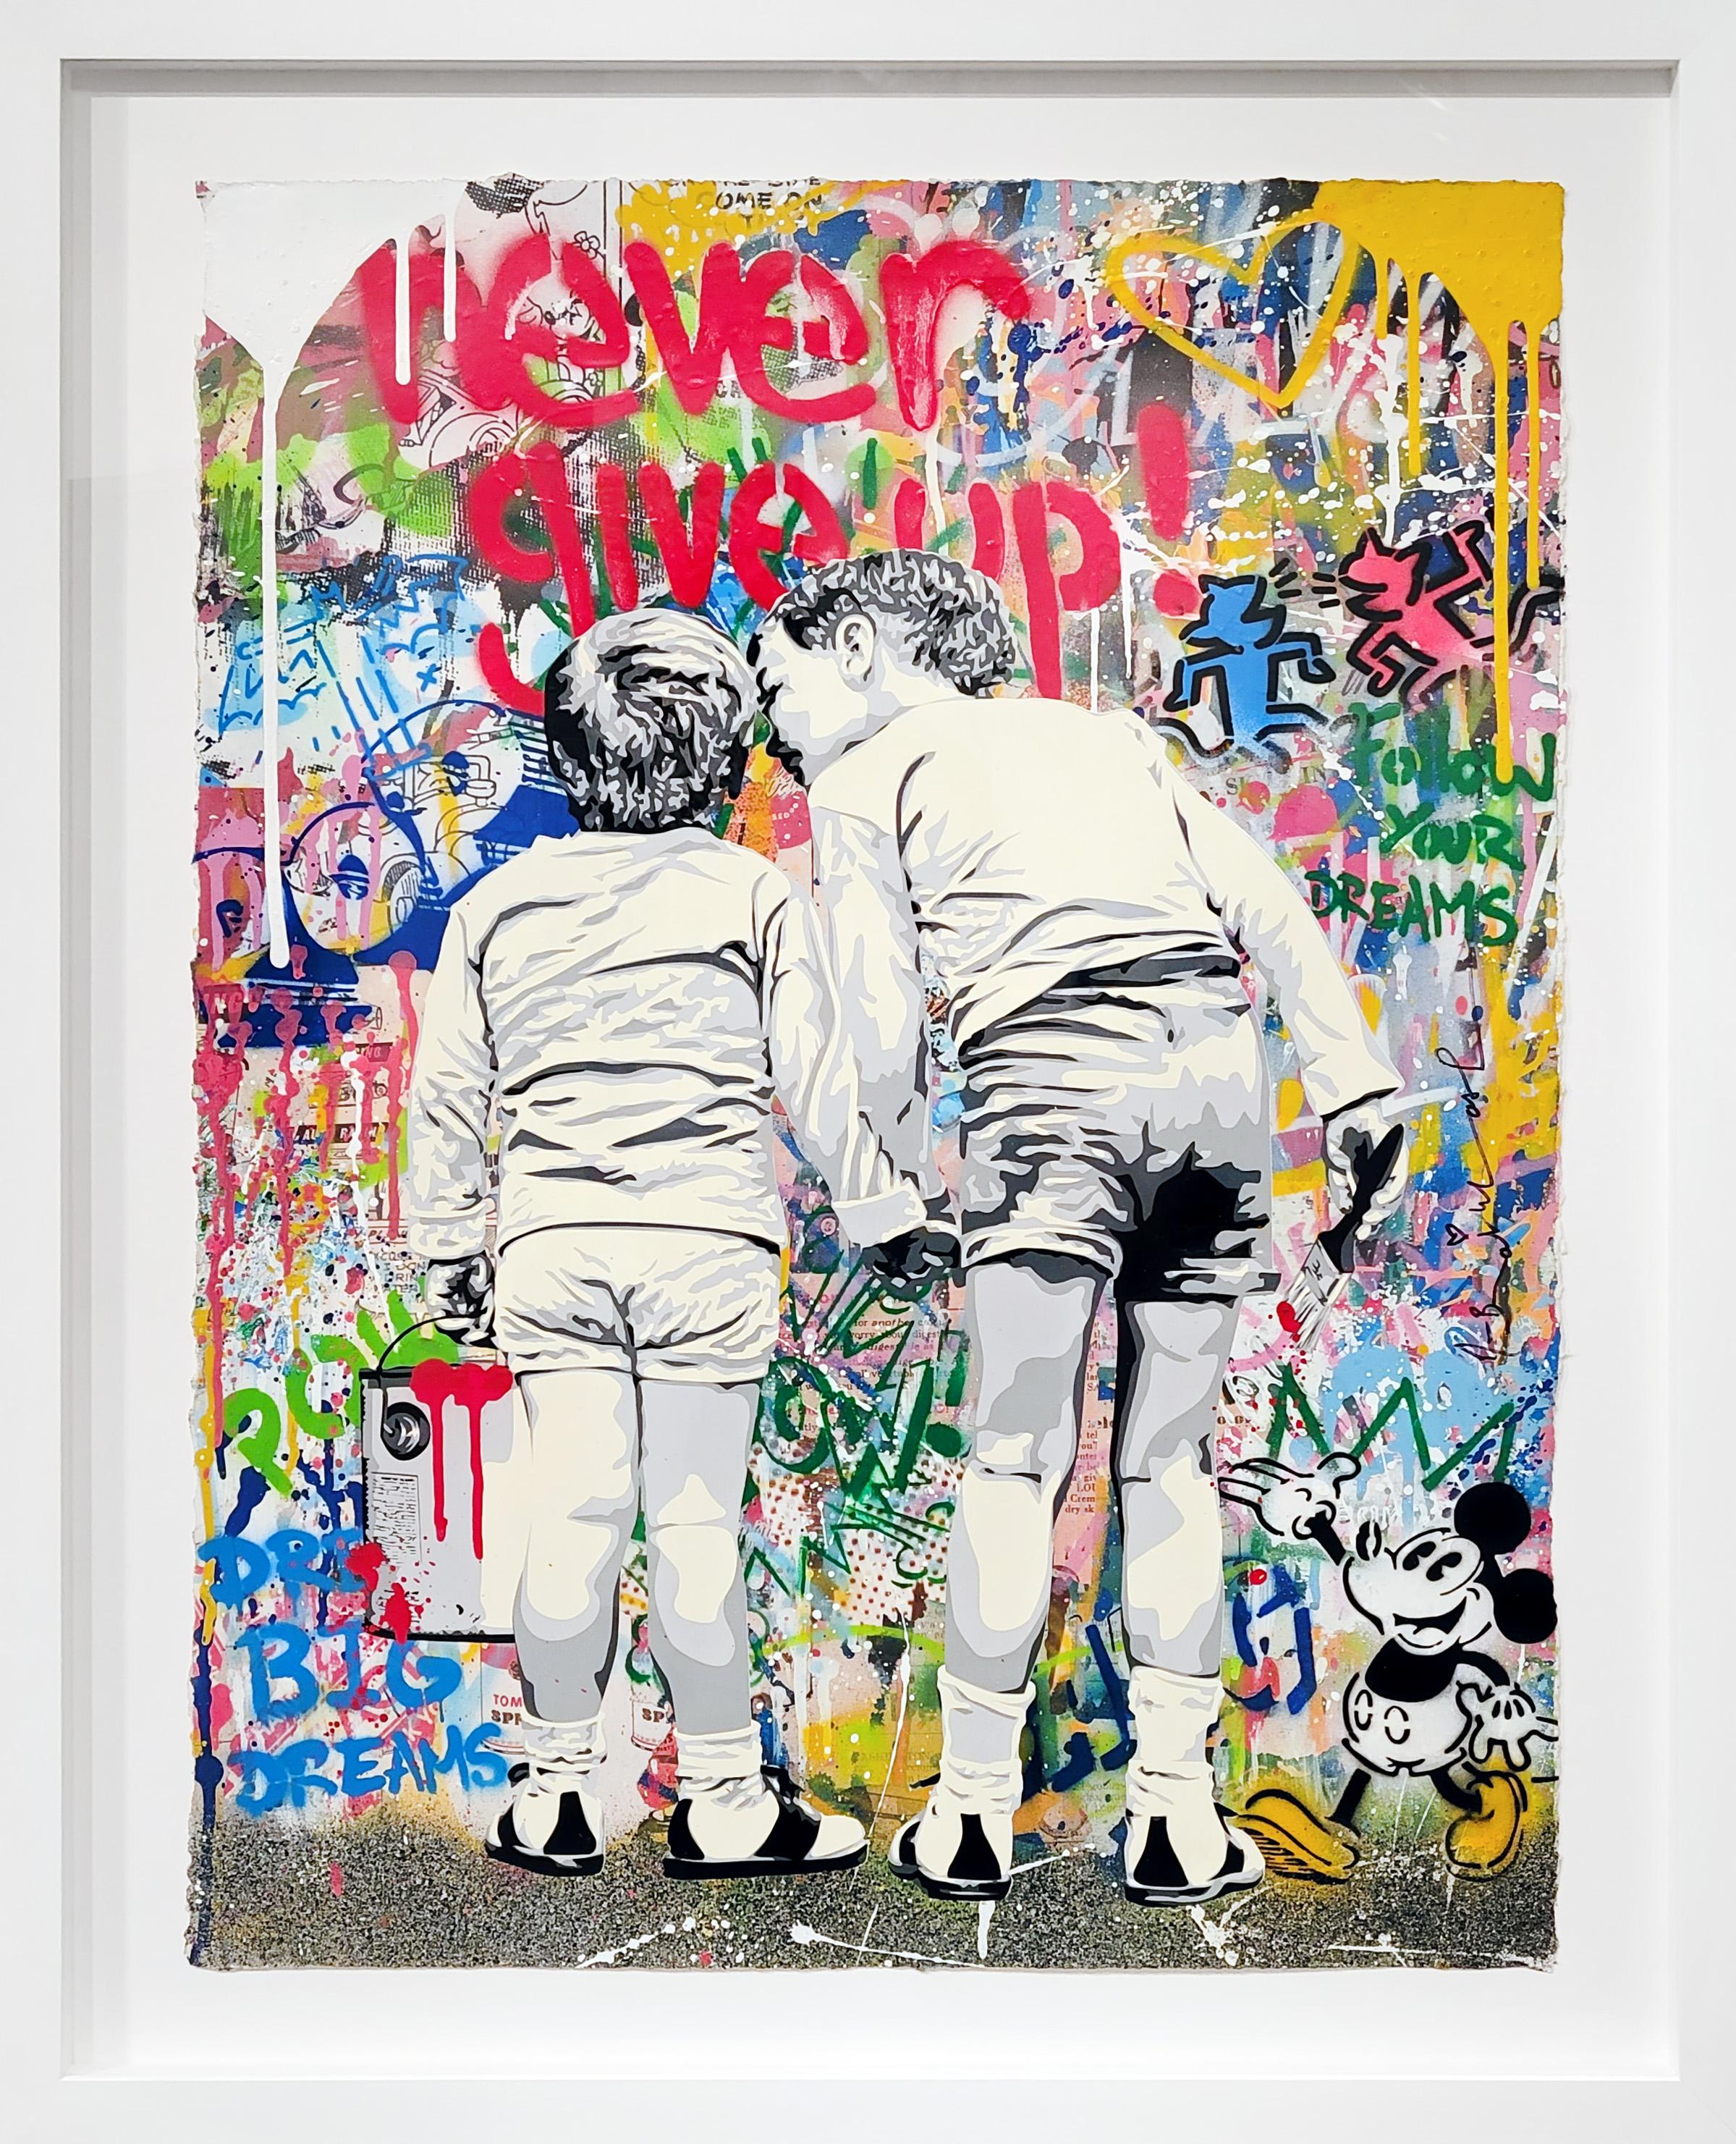 Brother's Advice - Mixed Media Art by Mr. Brainwash